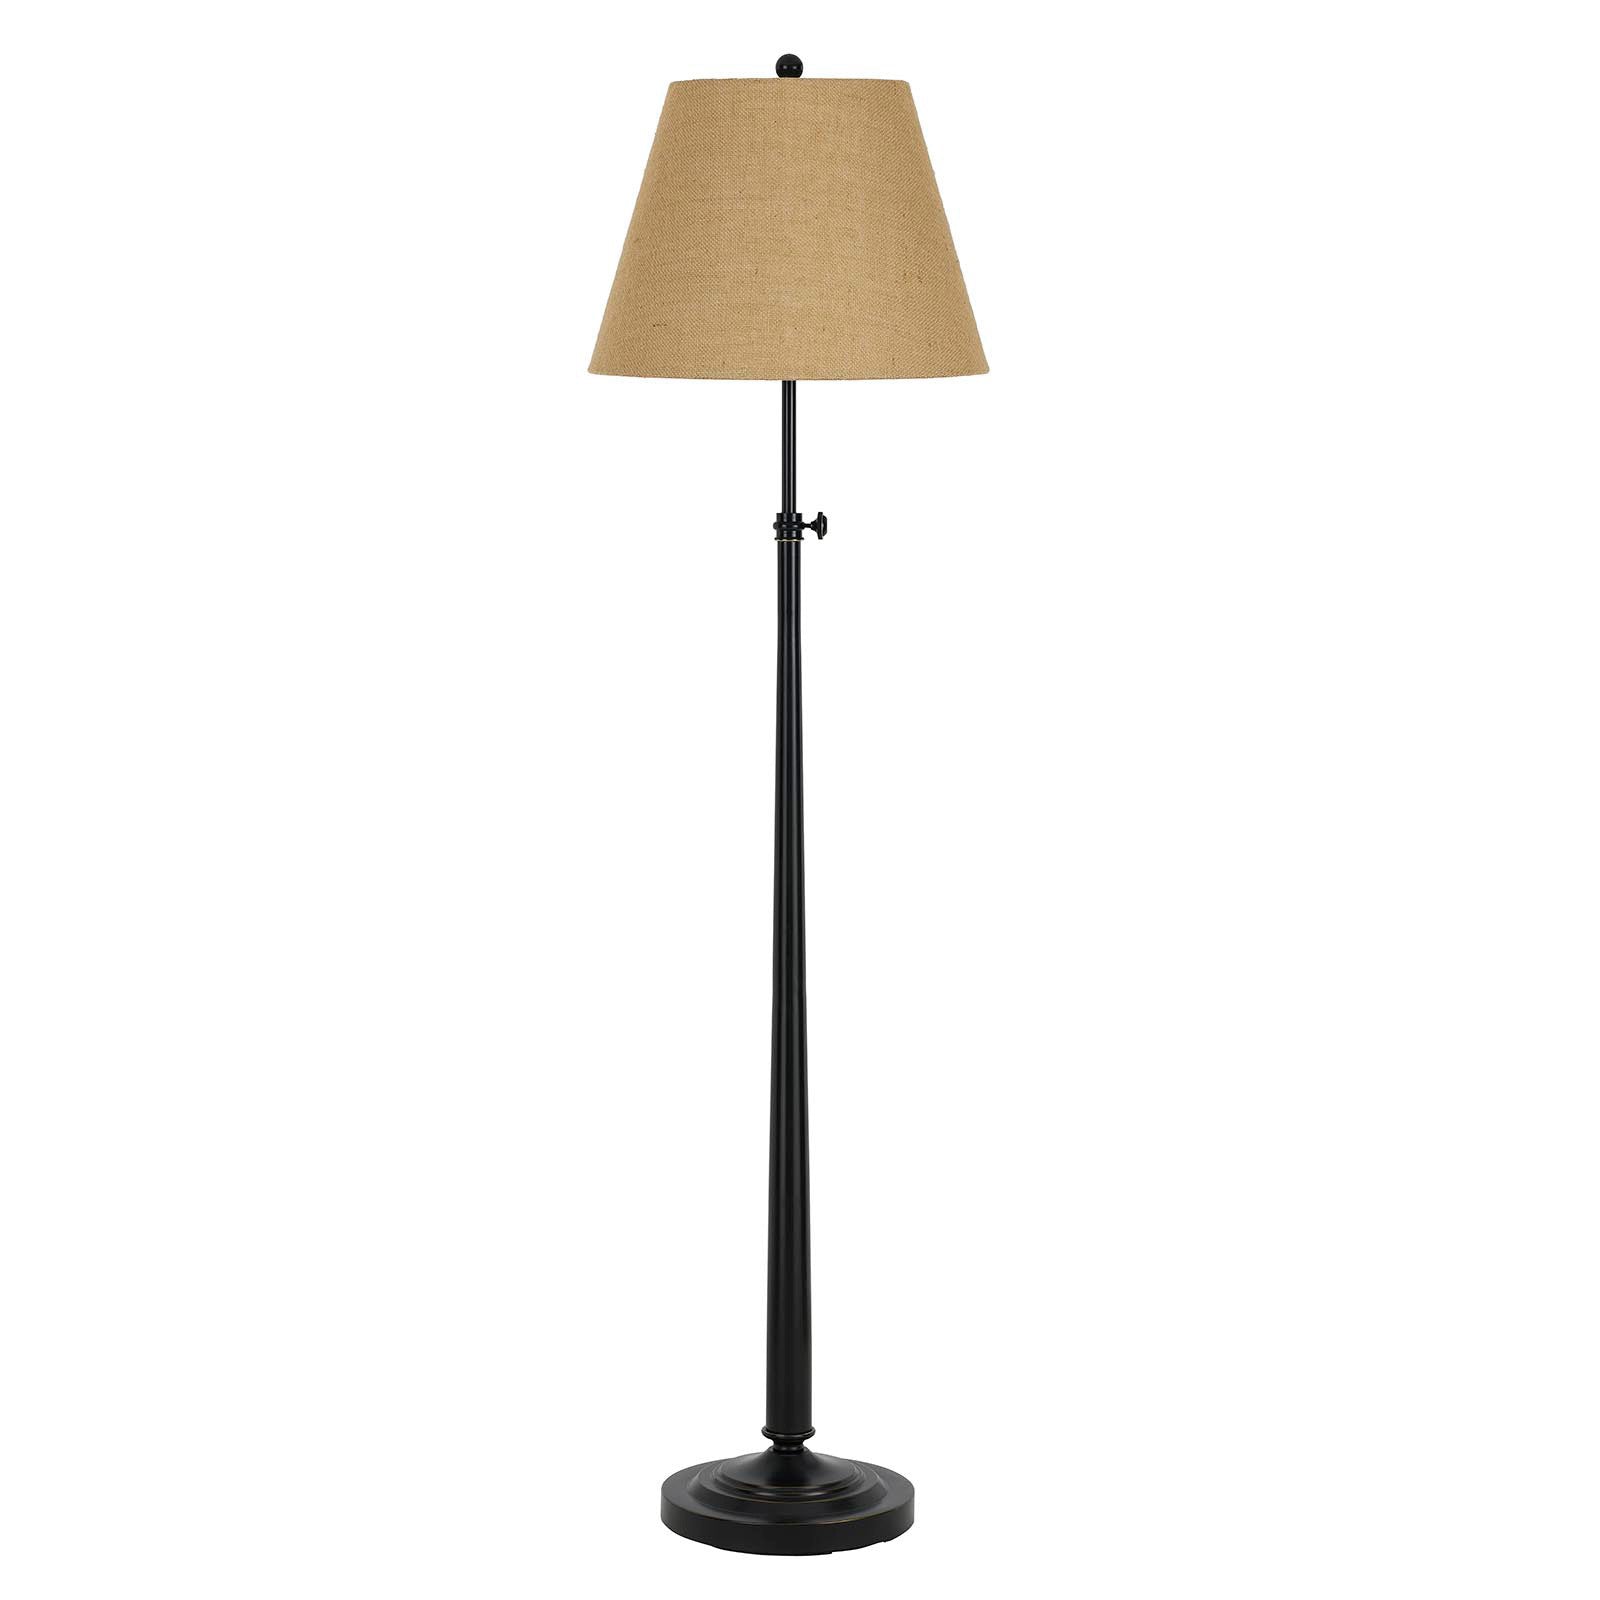 65" Bronze Adjustable Traditional Shaped Floor Lamp With Brown Empire Shade